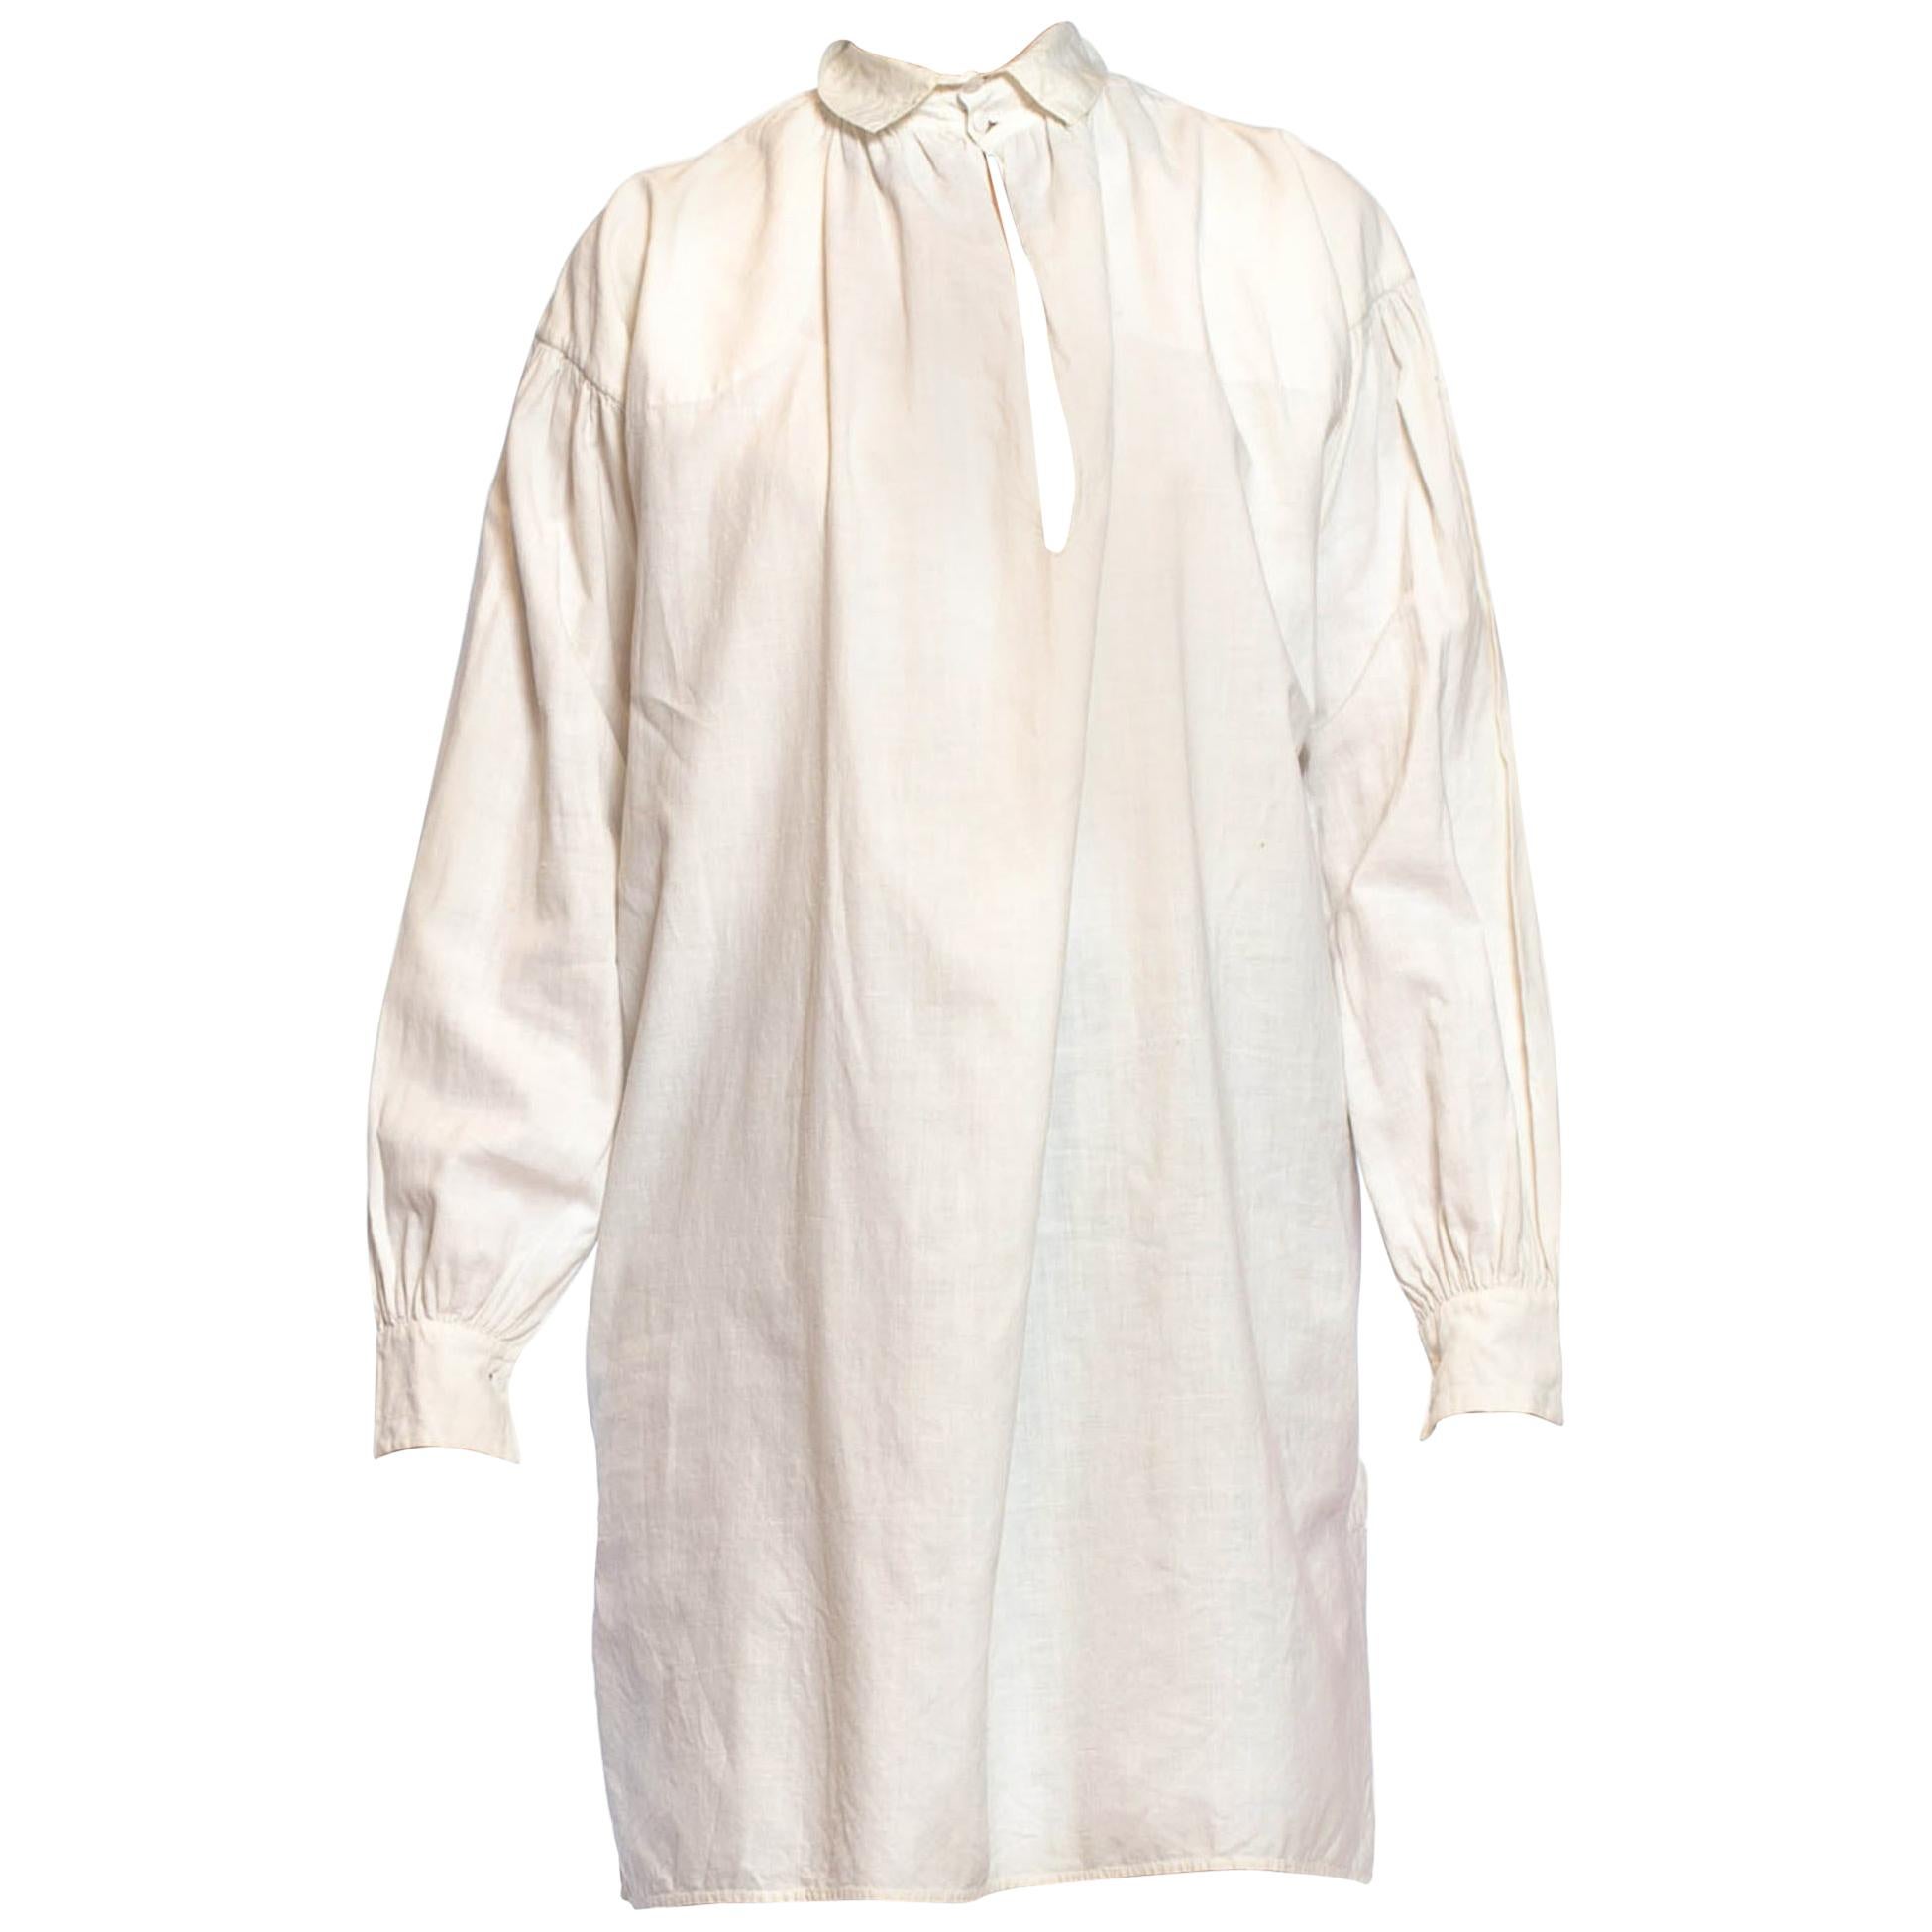 Victorian Ivory Linen & Cotton Men's Shirt From 1810-1830 For Sale